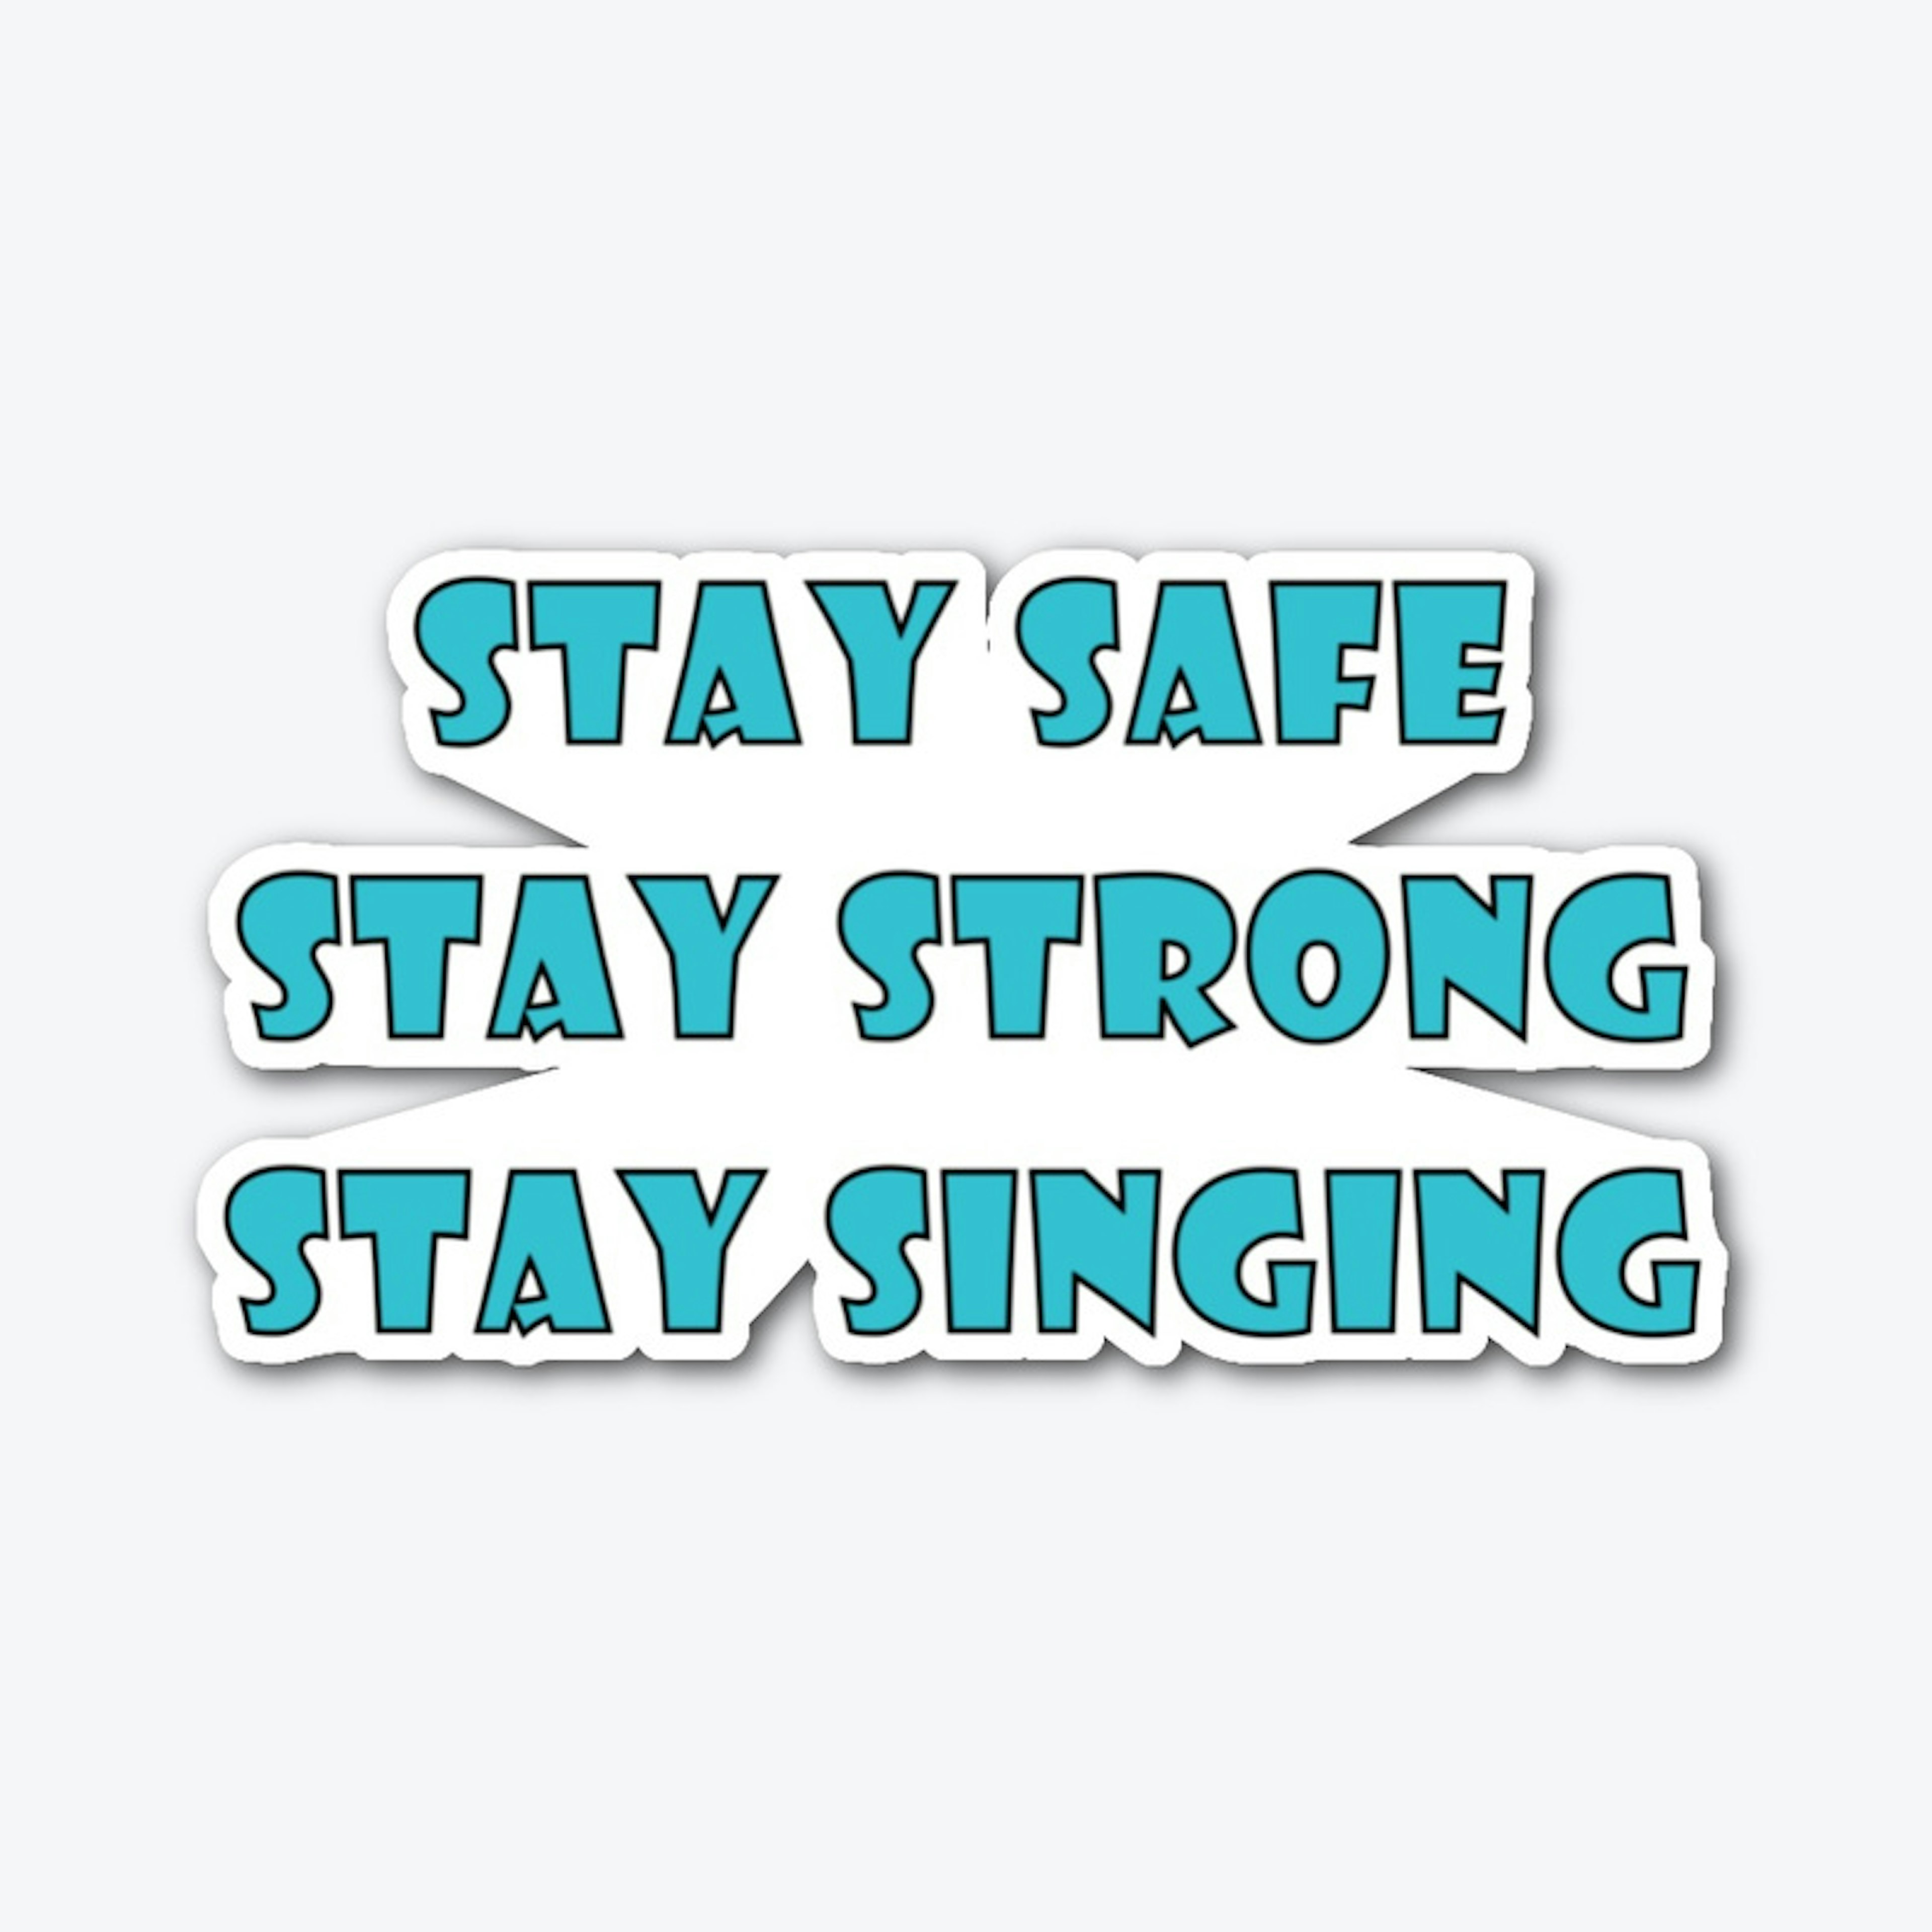 Stay Safe, Stay Strong, Stay Singing